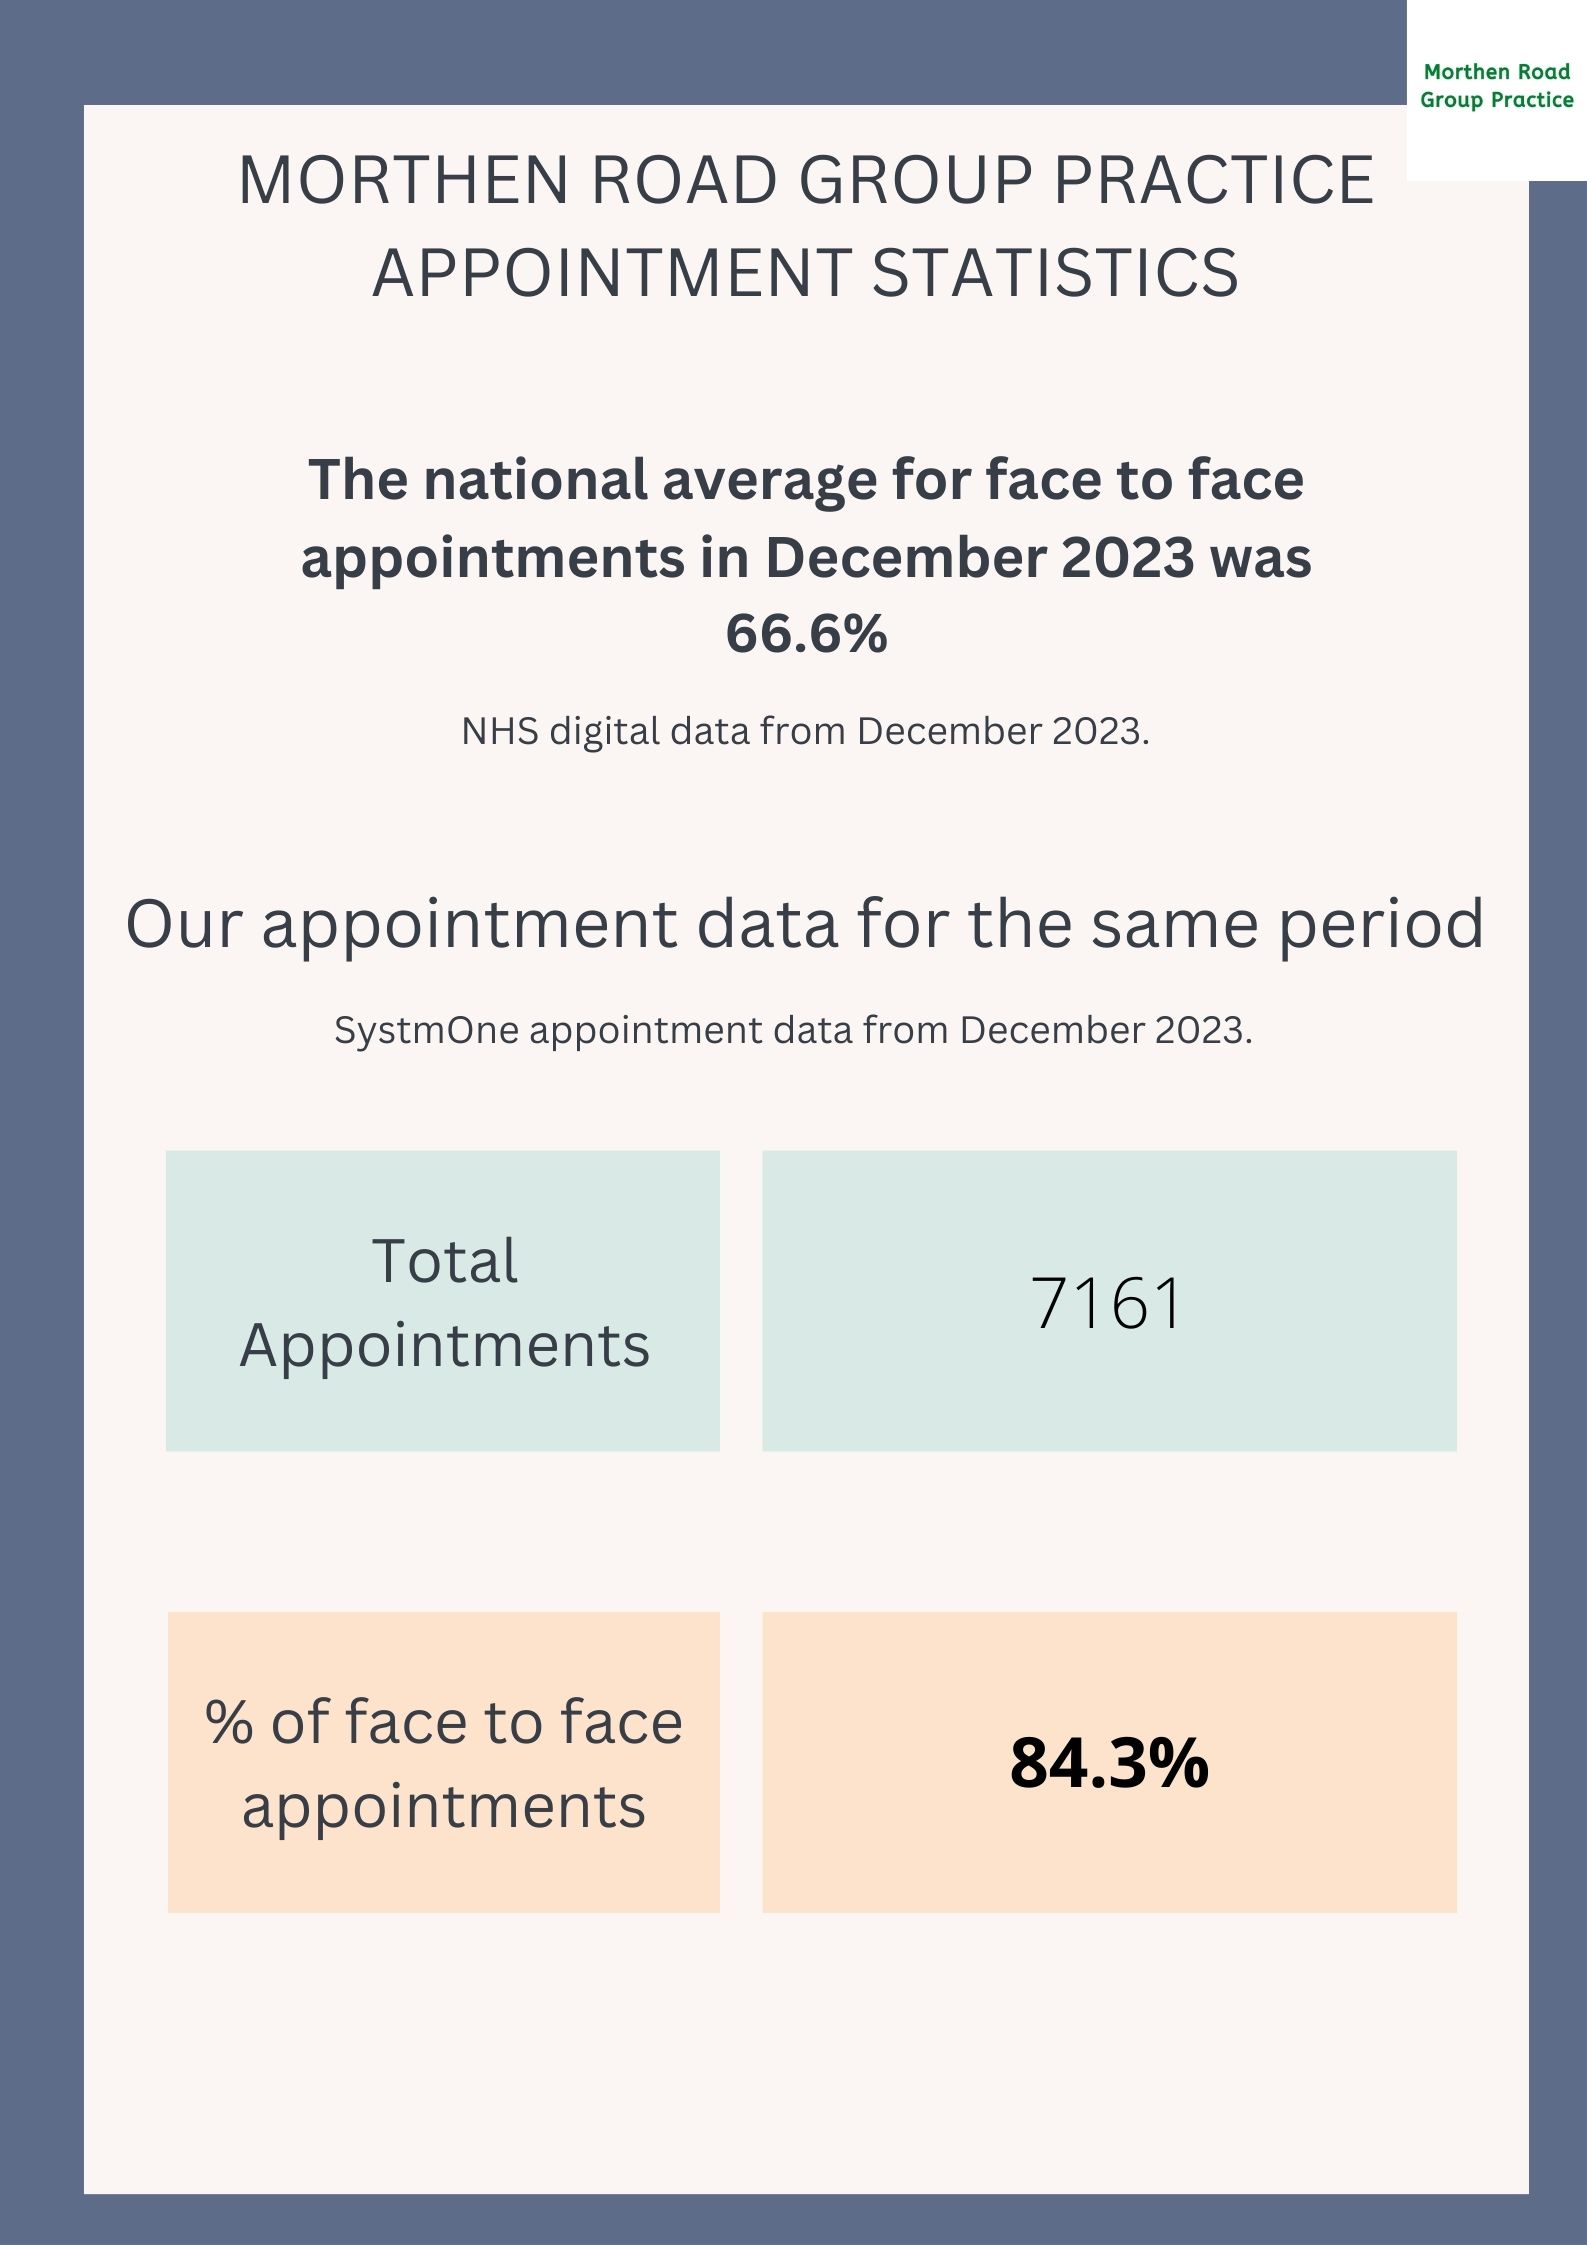 Morthen Road Group Practice Appointment Statistics NHS Digital data from December 2023  The national average for face to face appointments in December 2023 was 66.6 percent  Our appointment data for the same period SystmOne appointment data from December 2023  Total Appointments 7161 percent of face to face appointments: 84.3 percent